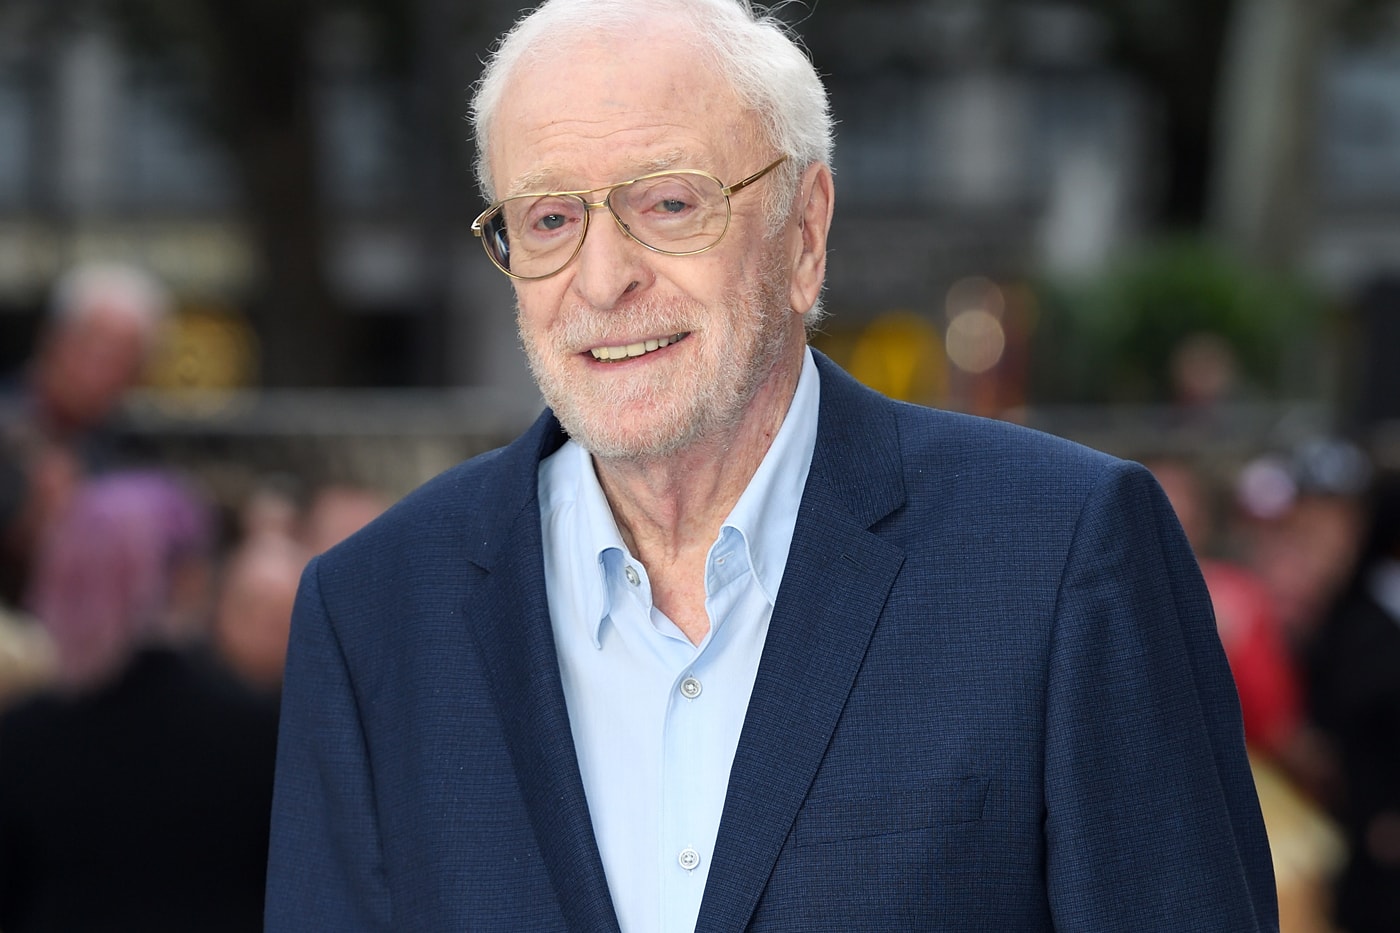 Sir Michael Caine reflects on his career and faces mortality